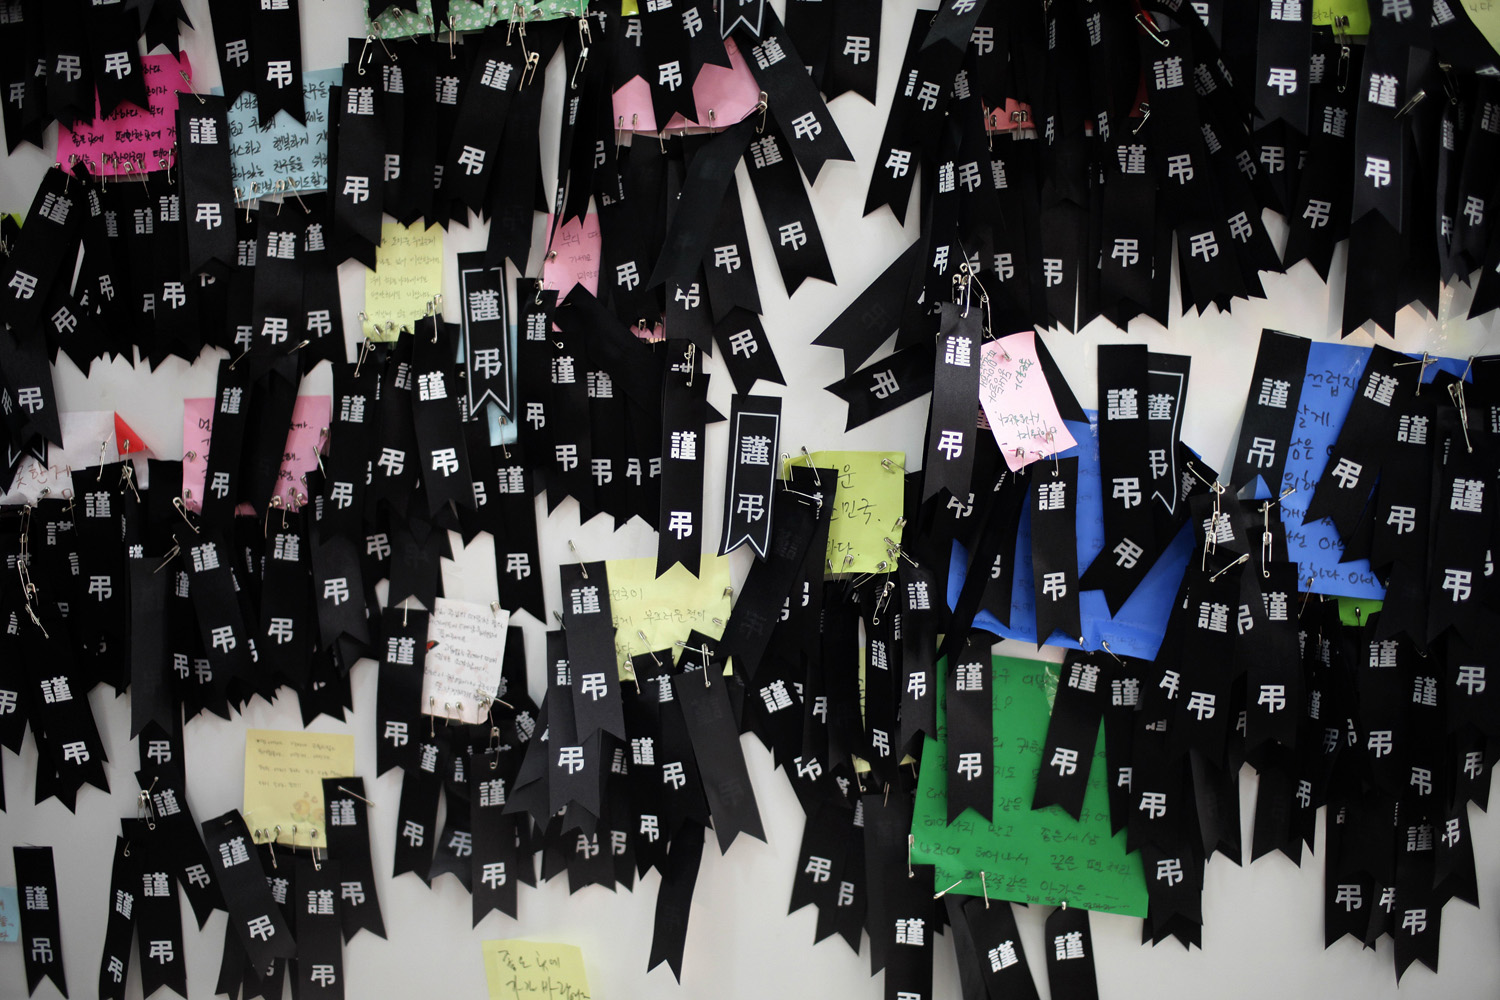 Black condolence ribbons attached along with messages for victims of the Sewol ferry sinking at Olympic Memorial Museum in Ansan, South Korea.